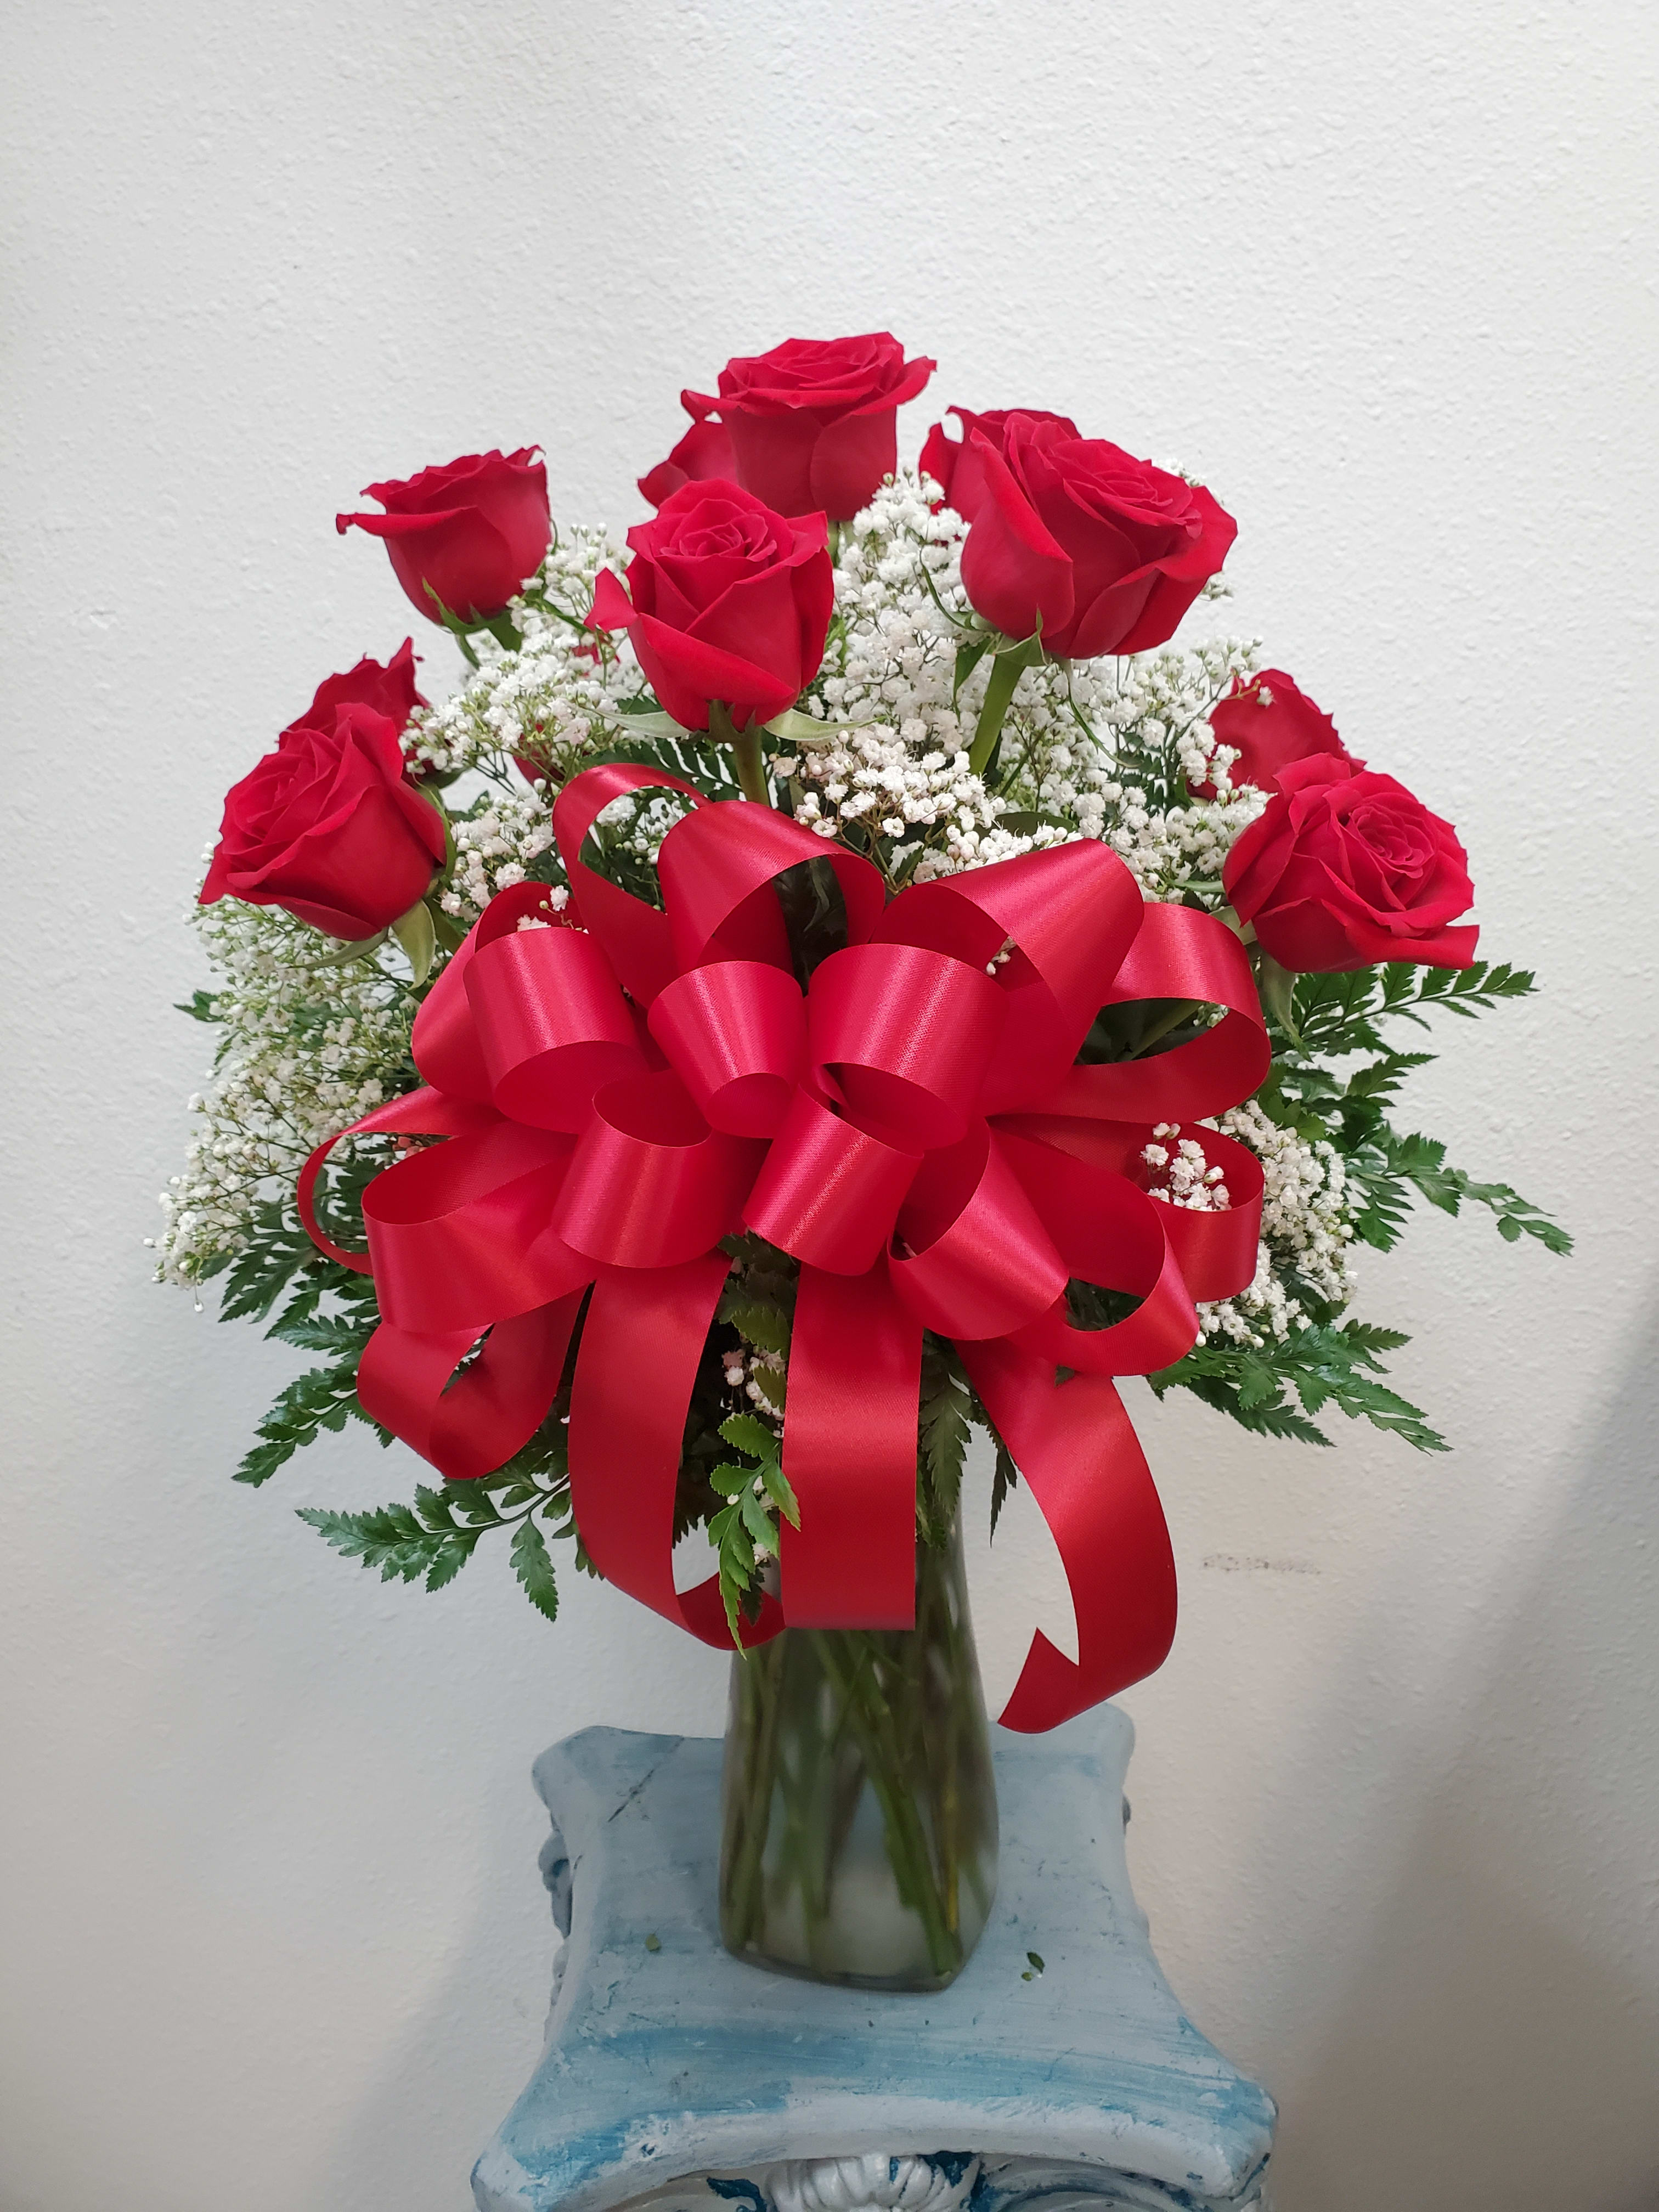 12 Classic Roses - These Classic Roses for the perfect traditional bouquet for a birthday, anniversary or other special day. This bouquet of a dozen long stem red roses adorned with classic mixed greenery and baby's breath is a fantastic gift of love.